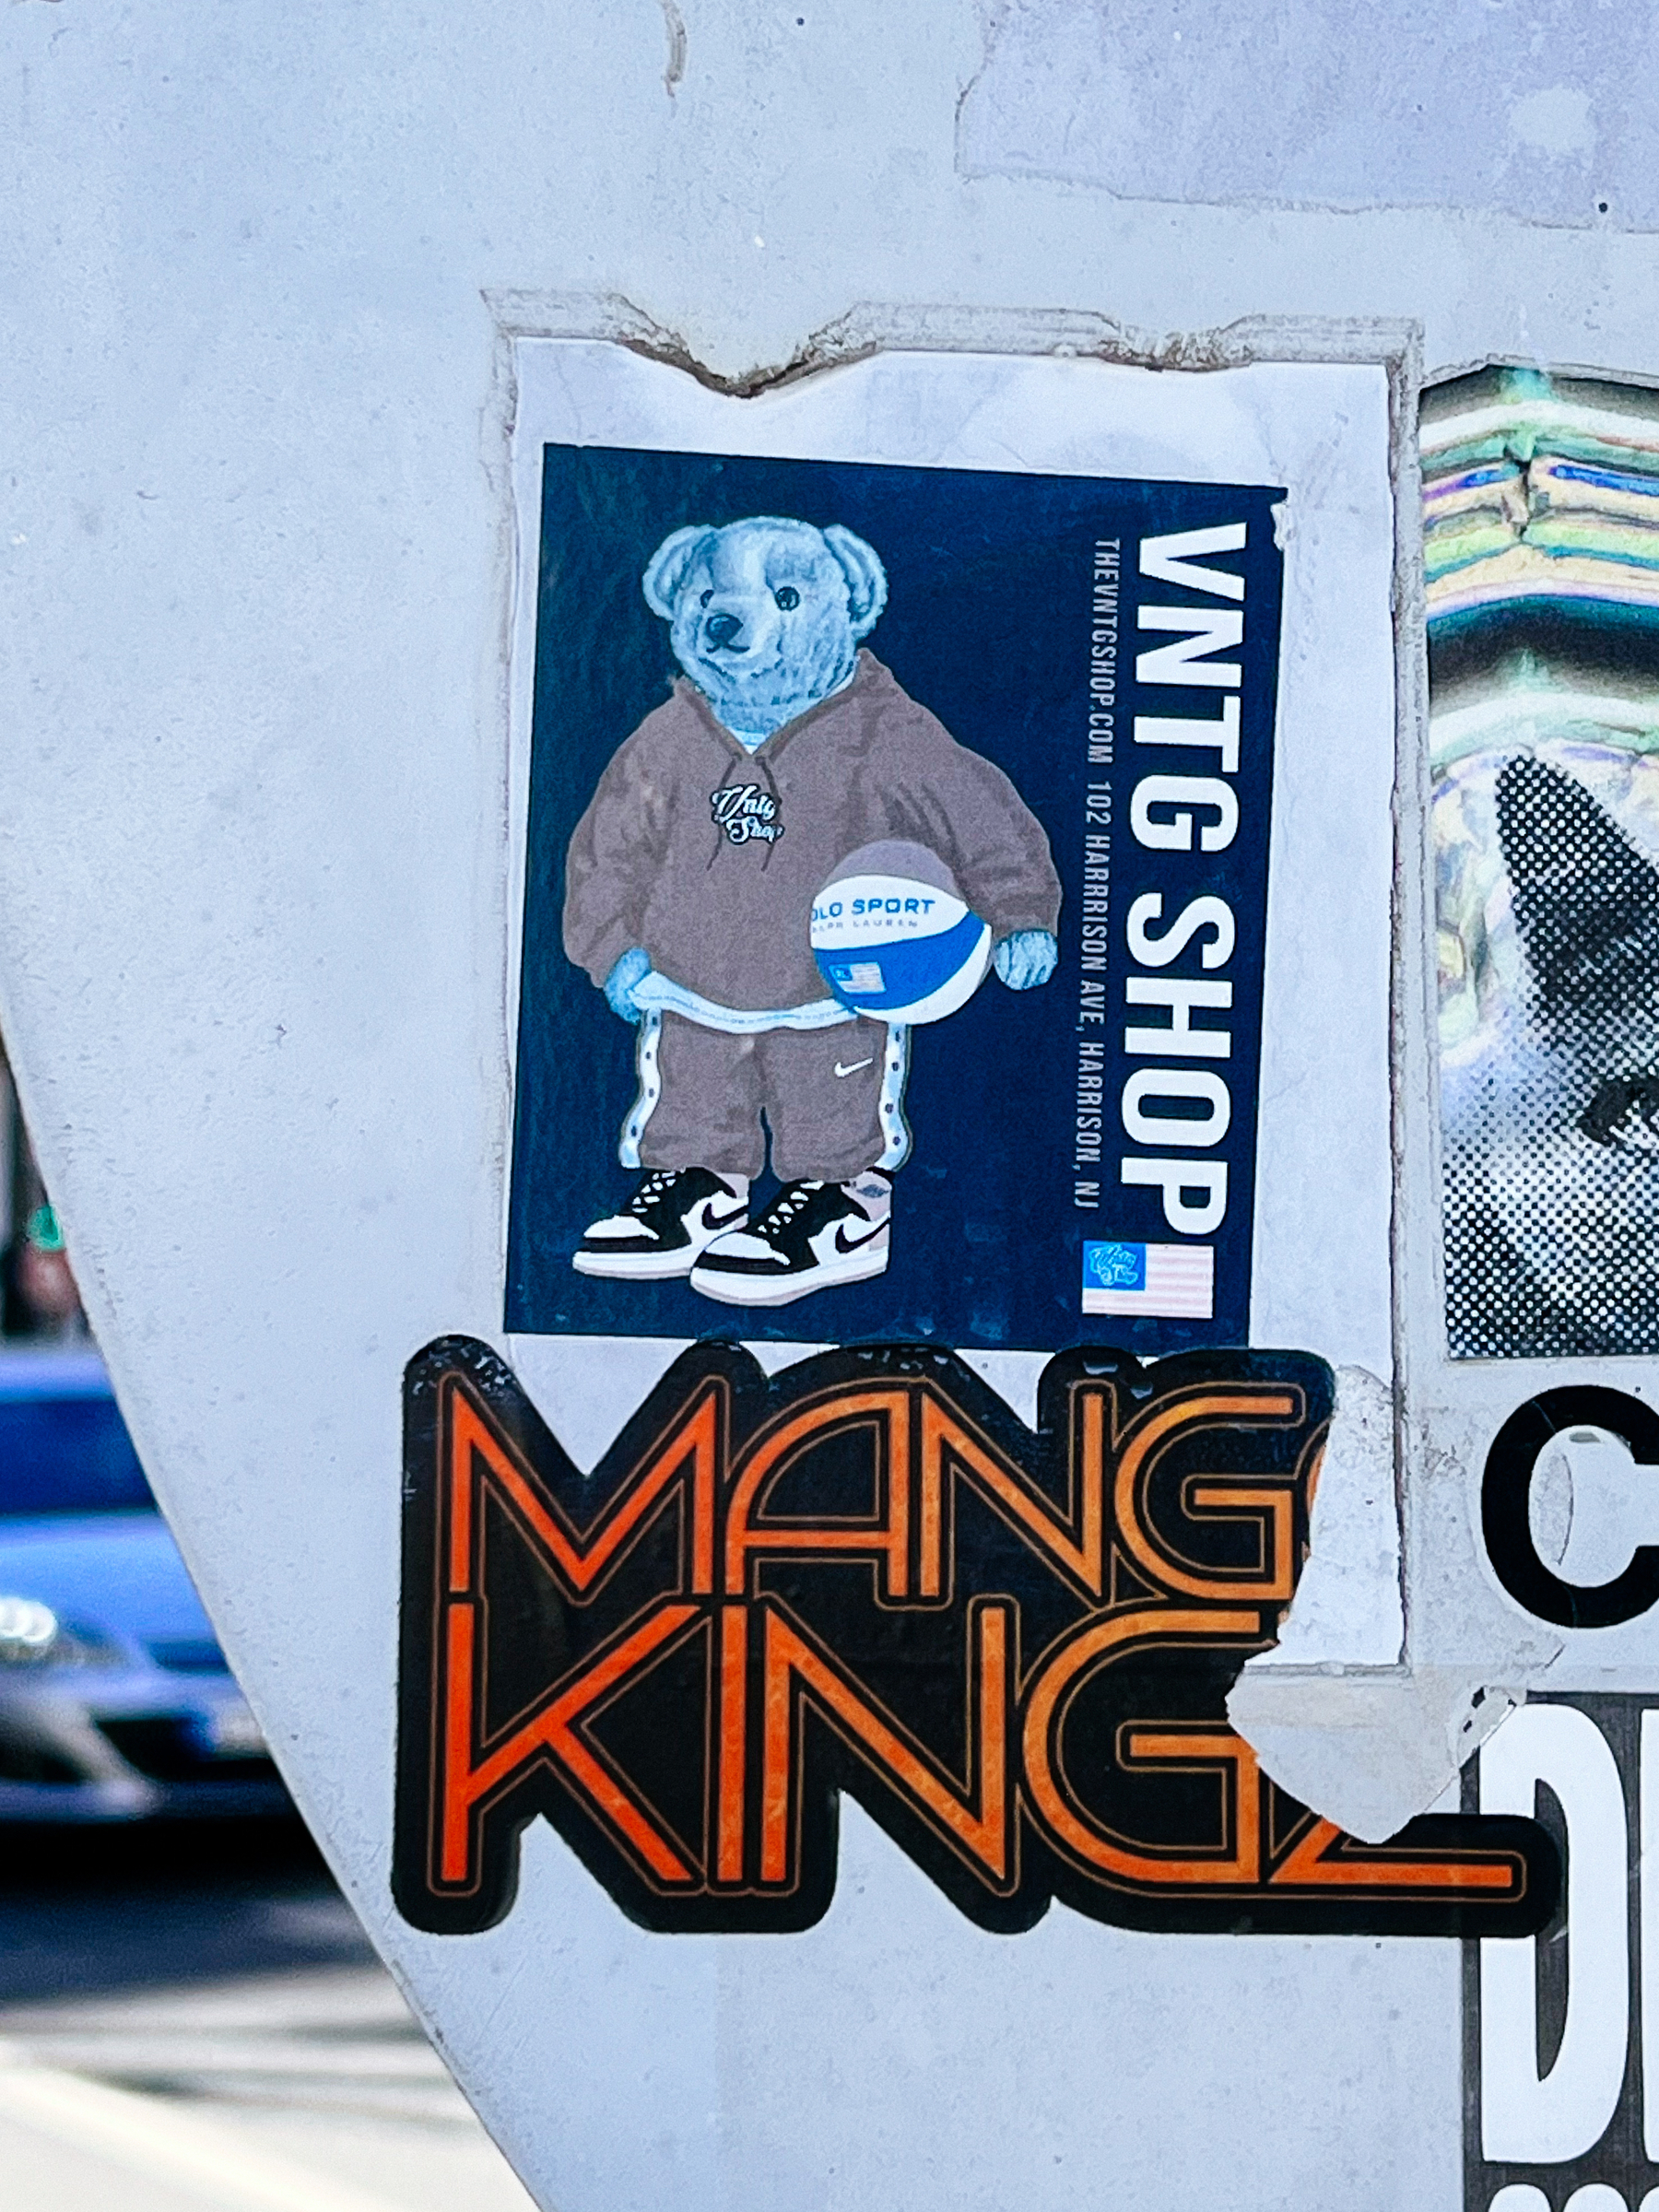 Sticker of a koala wearing a hoodie and sneakers, holding a basketball.